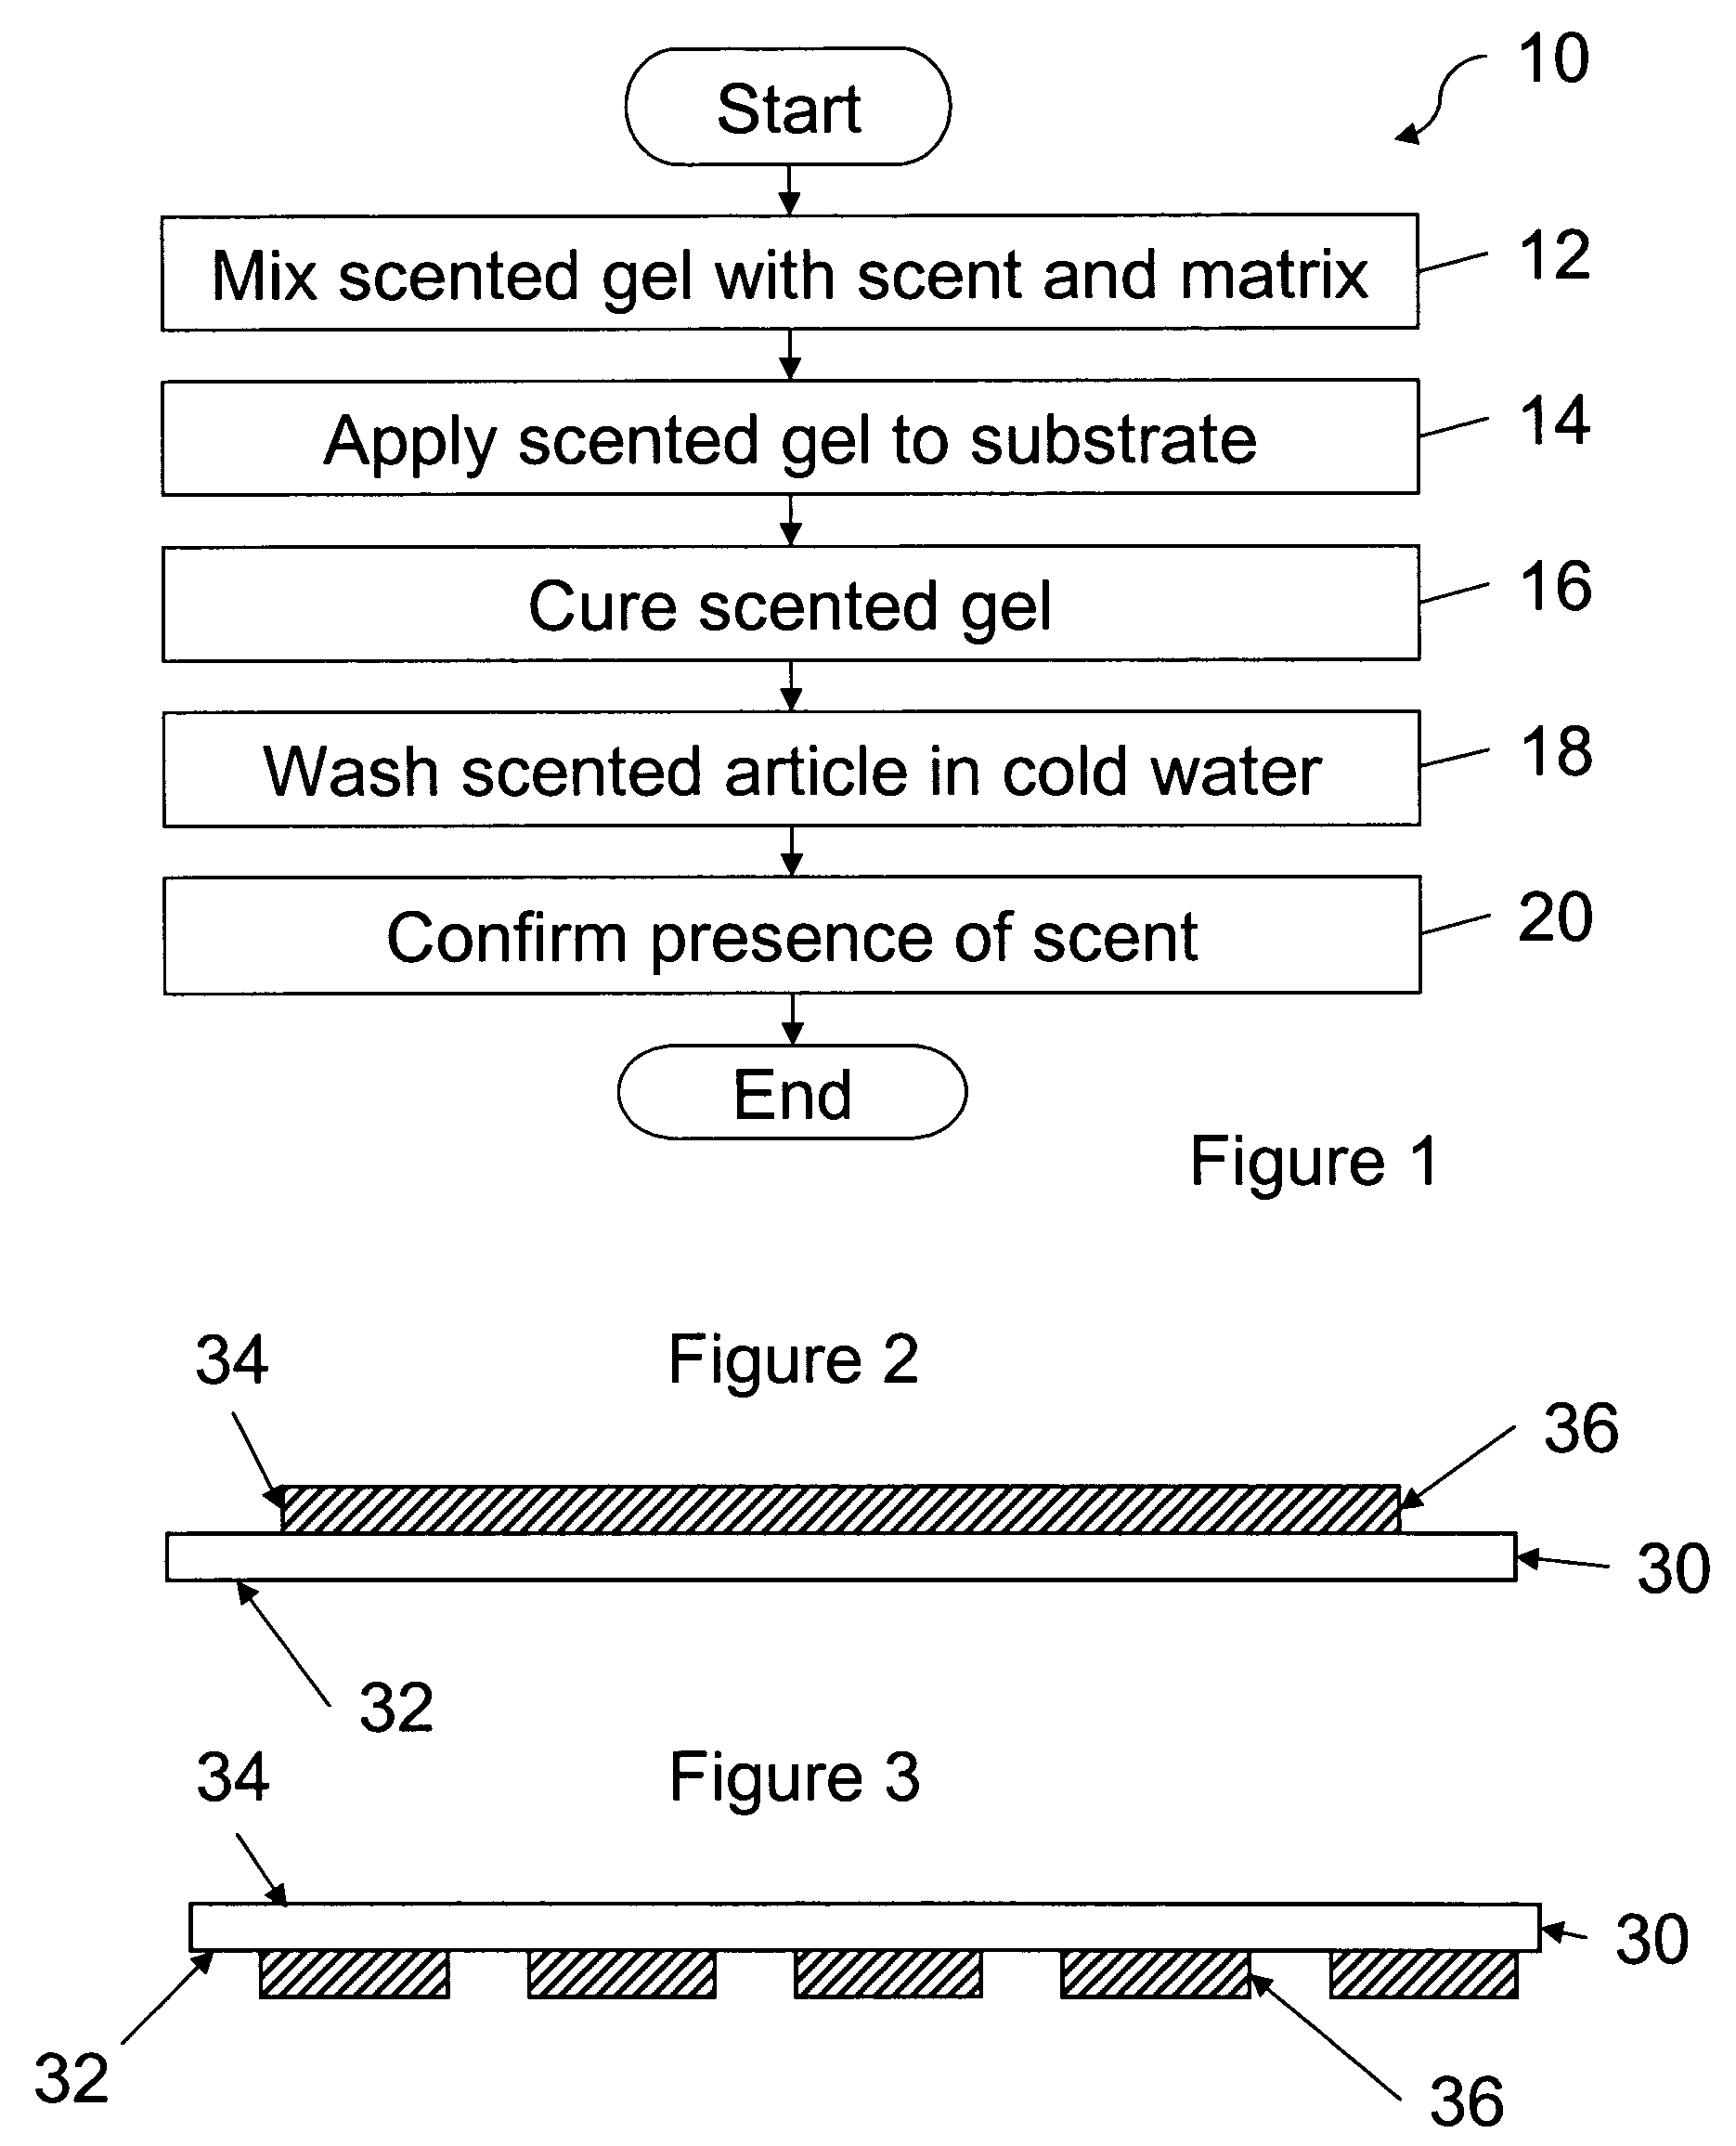 Composition and methods for applying a scent to an article